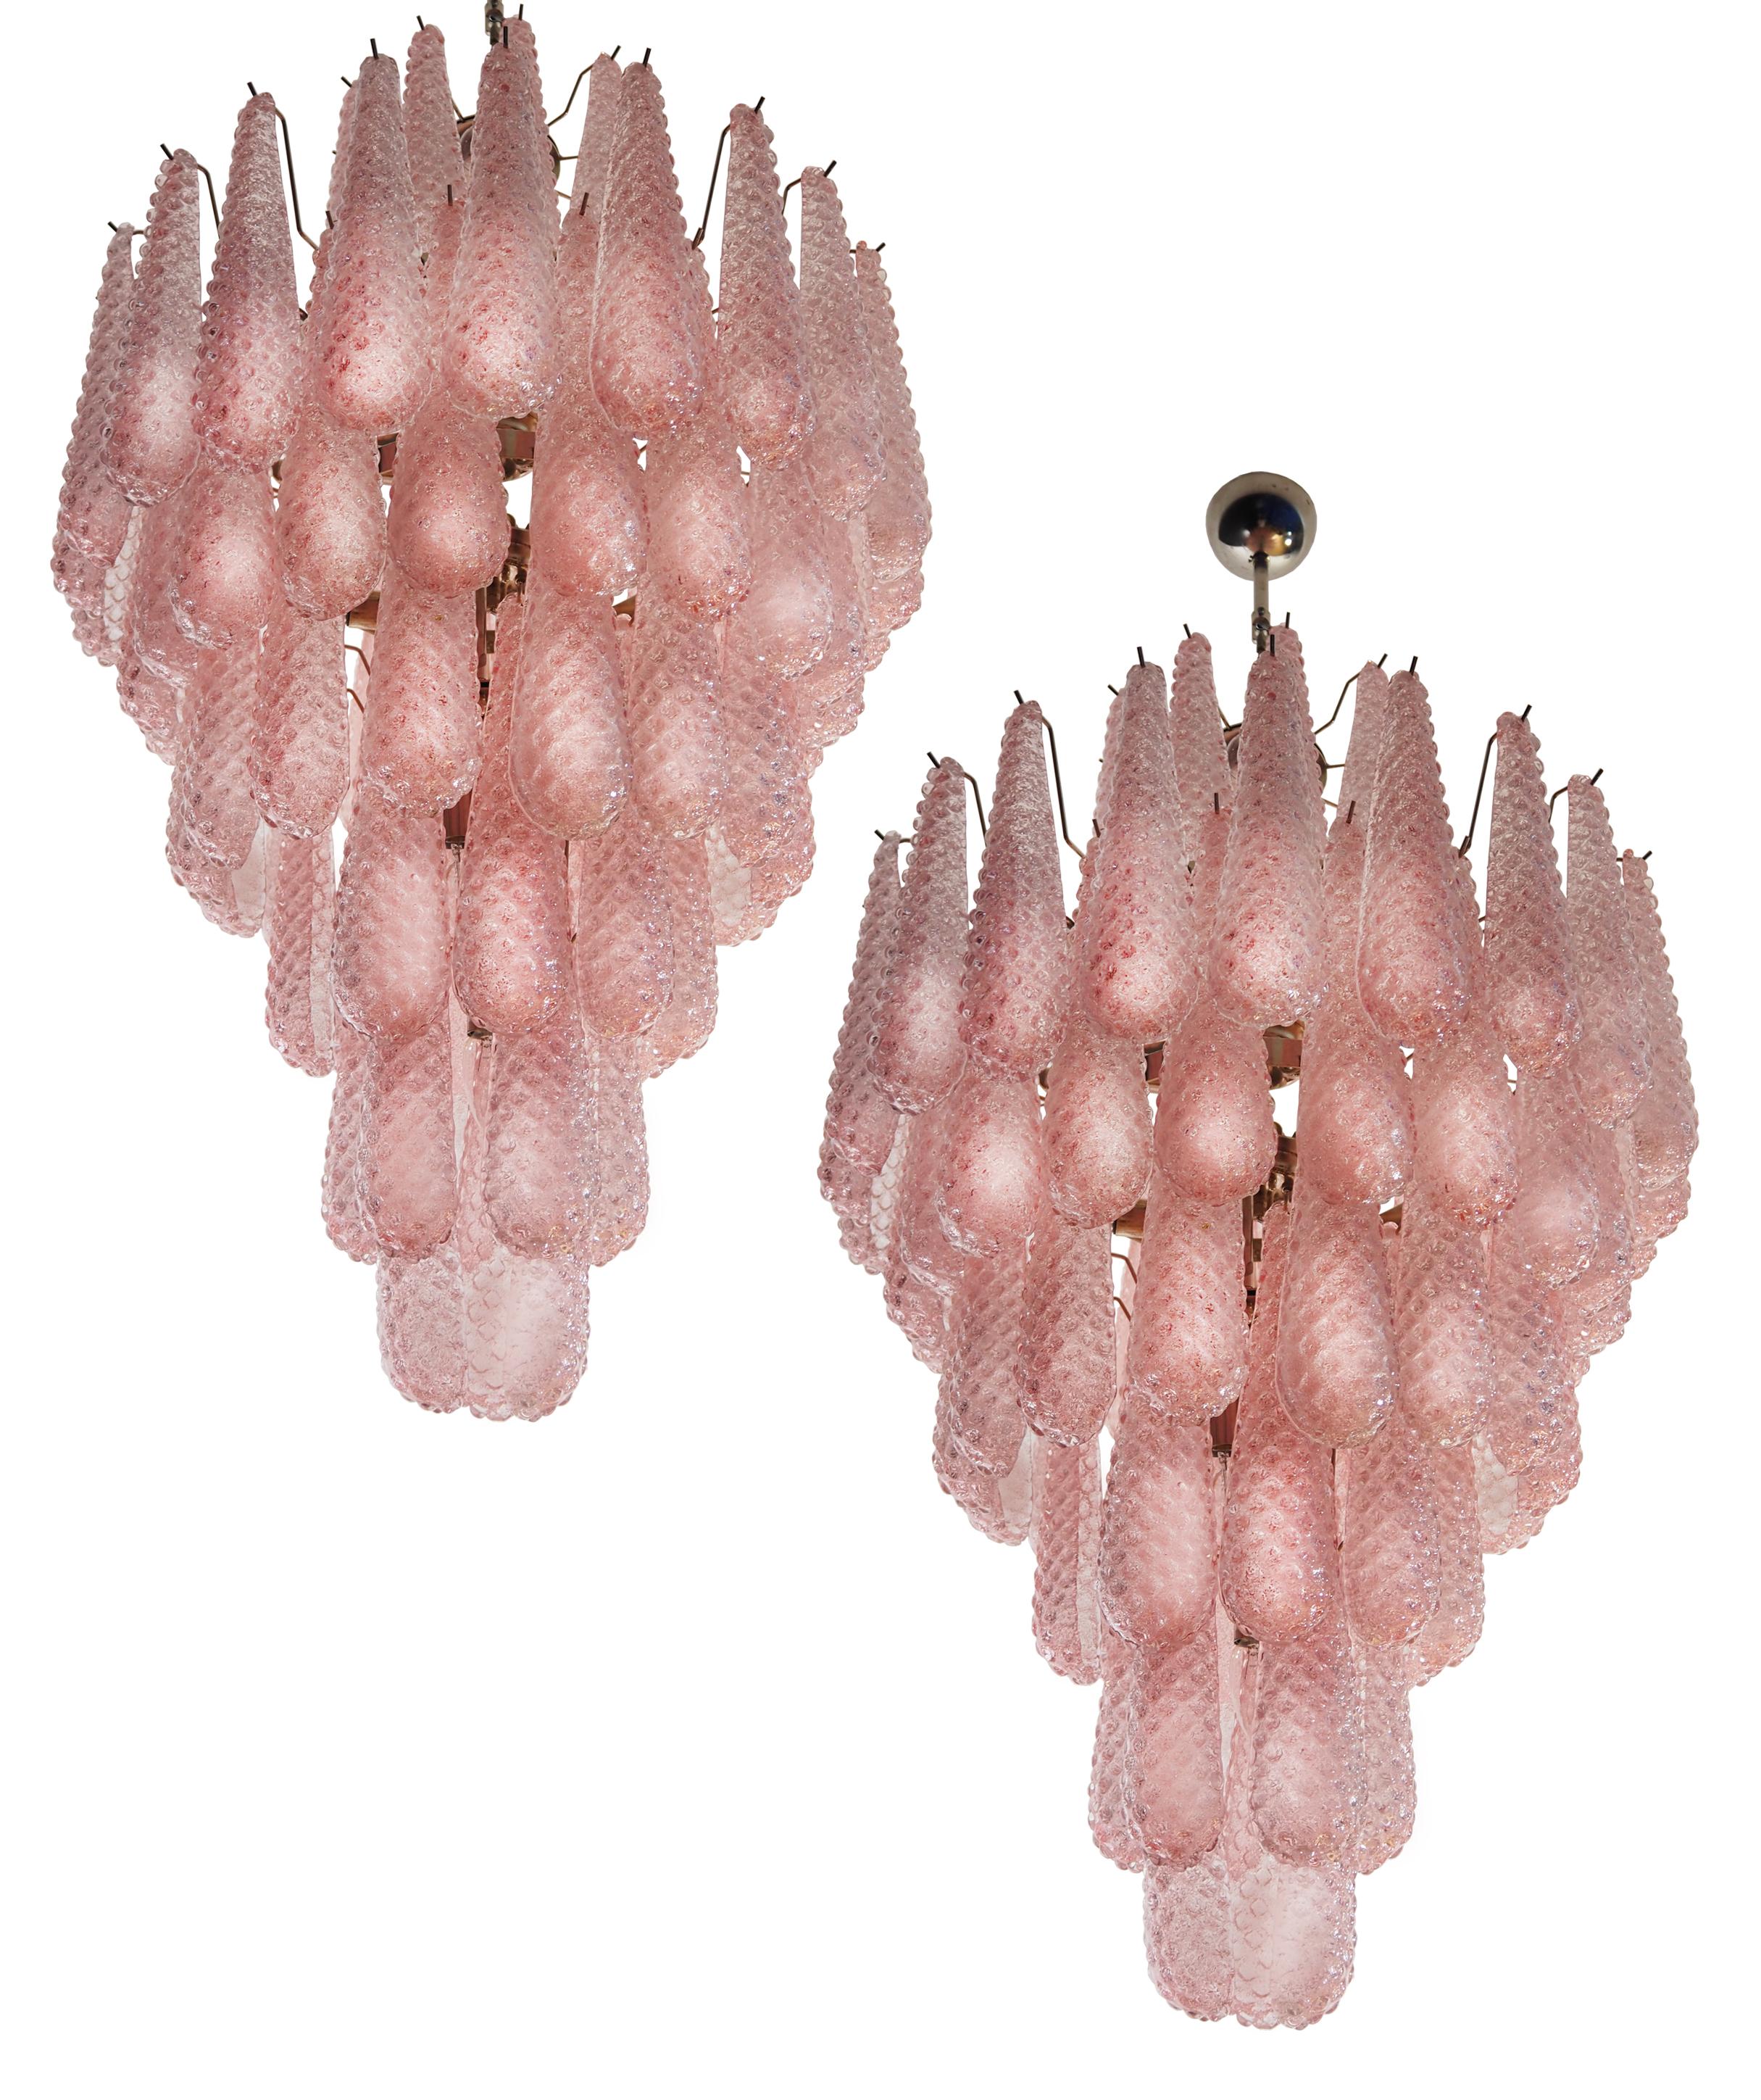 Pair Gorgeous Italian vintage chandeliers made from 85 great hourglass Murano glass. 7 levels. Nickel plated metal frame.
Period: late XX century
Dimensions: 48,50 inches (125 cm) height without chain; 29,50 inches (75 cm) diameter – I can add any